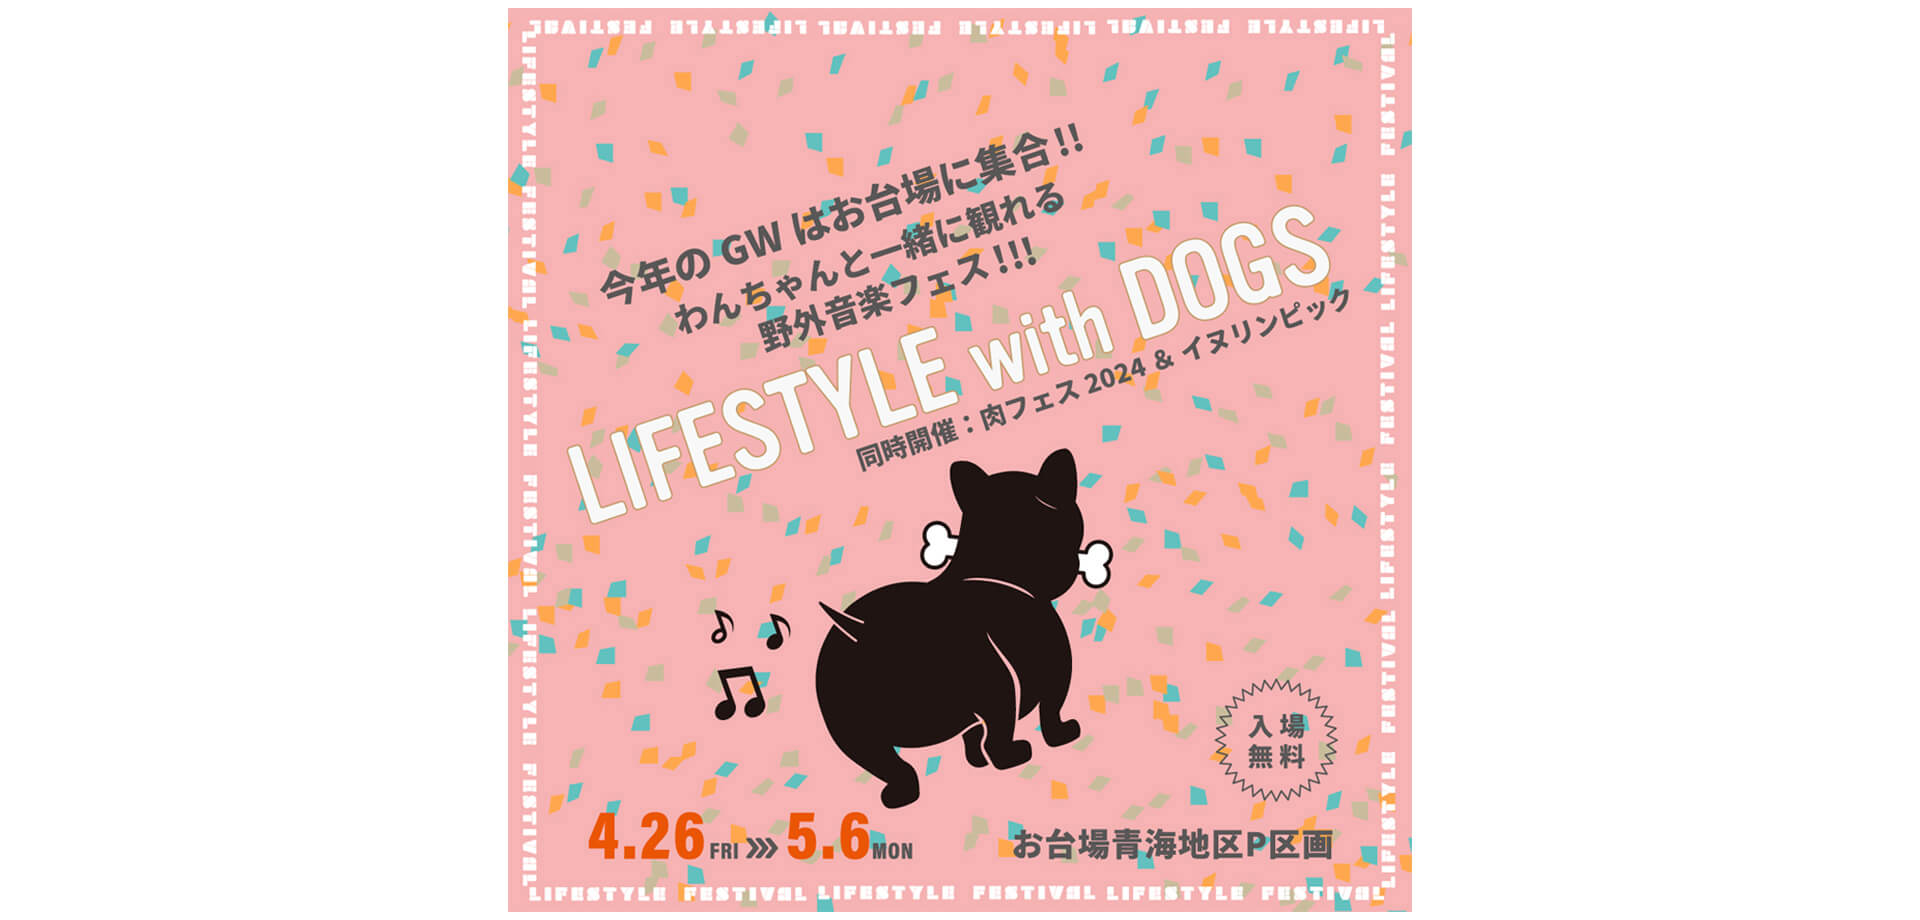 LIFESTYLE with DOGS バナー